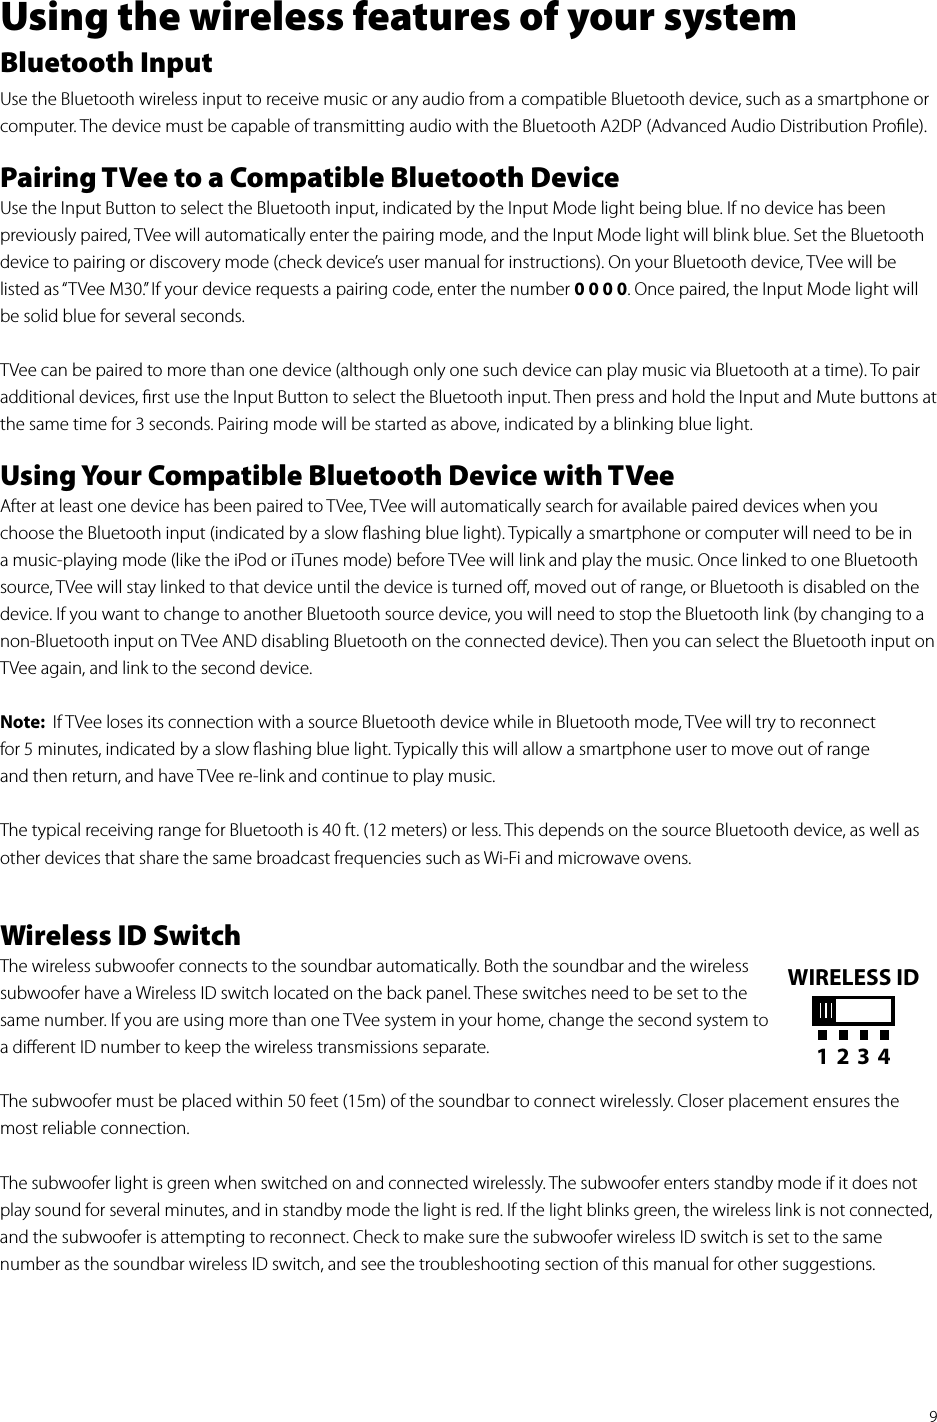 9Using the wireless features of your systemBluetooth InputUse the Bluetooth wireless input to receive music or any audio from a compatible Bluetooth device, such as a smartphone or computer. The device must be capable of transmitting audio with the Bluetooth A2DP (Advanced Audio Distribution Proﬁle).Pairing TVee to a Compatible Bluetooth DeviceUse the Input Button to select the Bluetooth input, indicated by the Input Mode light being blue. If no device has been previously paired, TVee will automatically enter the pairing mode, and the Input Mode light will blink blue. Set the Bluetooth device to pairing or discovery mode (check device’s user manual for instructions). On your Bluetooth device, TVee will be listed as “TVee M30.” If your device requests a pairing code, enter the number 0 0 0 0. Once paired, the Input Mode light will be solid blue for several seconds. TVee can be paired to more than one device (although only one such device can play music via Bluetooth at a time). To pair additional devices, ﬁrst use the Input Button to select the Bluetooth input. Then press and hold the Input and Mute buttons at the same time for 3 seconds. Pairing mode will be started as above, indicated by a blinking blue light.Using Your Compatible Bluetooth Device with TVee After at least one device has been paired to TVee, TVee will automatically search for available paired devices when you choose the Bluetooth input (indicated by a slow ﬂashing blue light). Typically a smartphone or computer will need to be in a music-playing mode (like the iPod or iTunes mode) before TVee will link and play the music. Once linked to one Bluetooth source, TVee will stay linked to that device until the device is turned oﬀ, moved out of range, or Bluetooth is disabled on the device. If you want to change to another Bluetooth source device, you will need to stop the Bluetooth link (by changing to a non-Bluetooth input on TVee AND disabling Bluetooth on the connected device). Then you can select the Bluetooth input on TVee again, and link to the second device. Note:  If TVee loses its connection with a source Bluetooth device while in Bluetooth mode, TVee will try to reconnect  for 5 minutes, indicated by a slow ﬂashing blue light. Typically this will allow a smartphone user to move out of range  and then return, and have TVee re-link and continue to play music.  The typical receiving range for Bluetooth is 40 ft. (12 meters) or less. This depends on the source Bluetooth device, as well as other devices that share the same broadcast frequencies such as Wi-Fi and microwave ovens. Wireless ID SwitchThe wireless subwoofer connects to the soundbar automatically. Both the soundbar and the wireless subwoofer have a Wireless ID switch located on the back panel. These switches need to be set to the same number. If you are using more than one TVee system in your home, change the second system to a diﬀerent ID number to keep the wireless transmissions separate. The subwoofer must be placed within 50 feet (15m) of the soundbar to connect wirelessly. Closer placement ensures the most reliable connection.The subwoofer light is green when switched on and connected wirelessly. The subwoofer enters standby mode if it does not play sound for several minutes, and in standby mode the light is red. If the light blinks green, the wireless link is not connected, and the subwoofer is attempting to reconnect. Check to make sure the subwoofer wireless ID switch is set to the same  number as the soundbar wireless ID switch, and see the troubleshooting section of this manual for other suggestions.WIRELESS ID1234